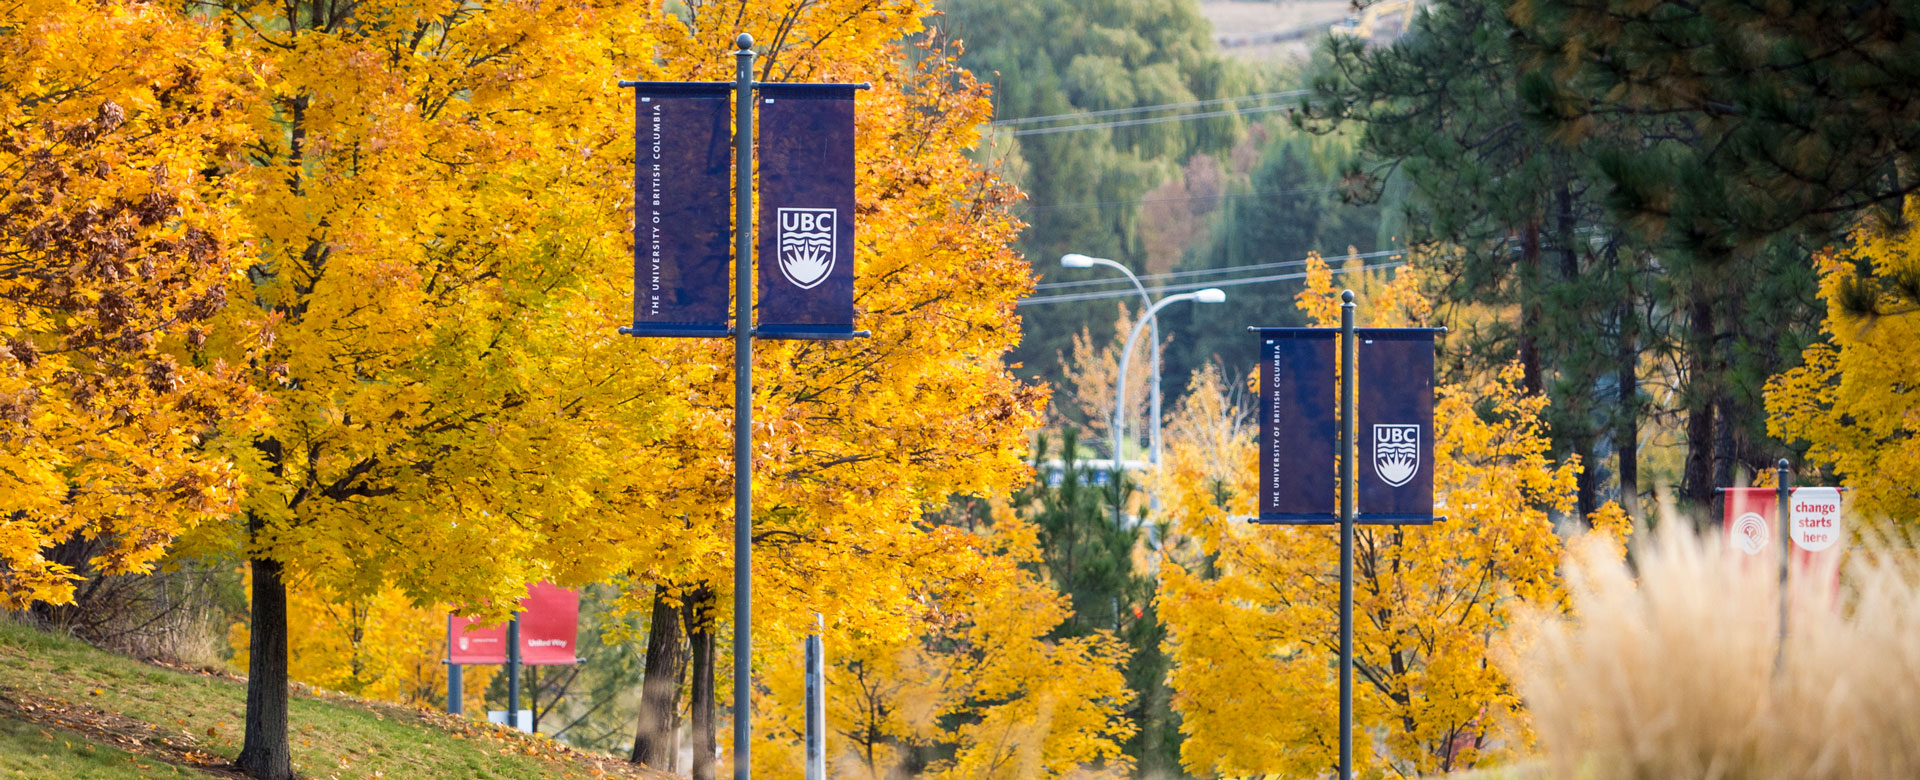 UBC banners hanging along an tree-lined campus street